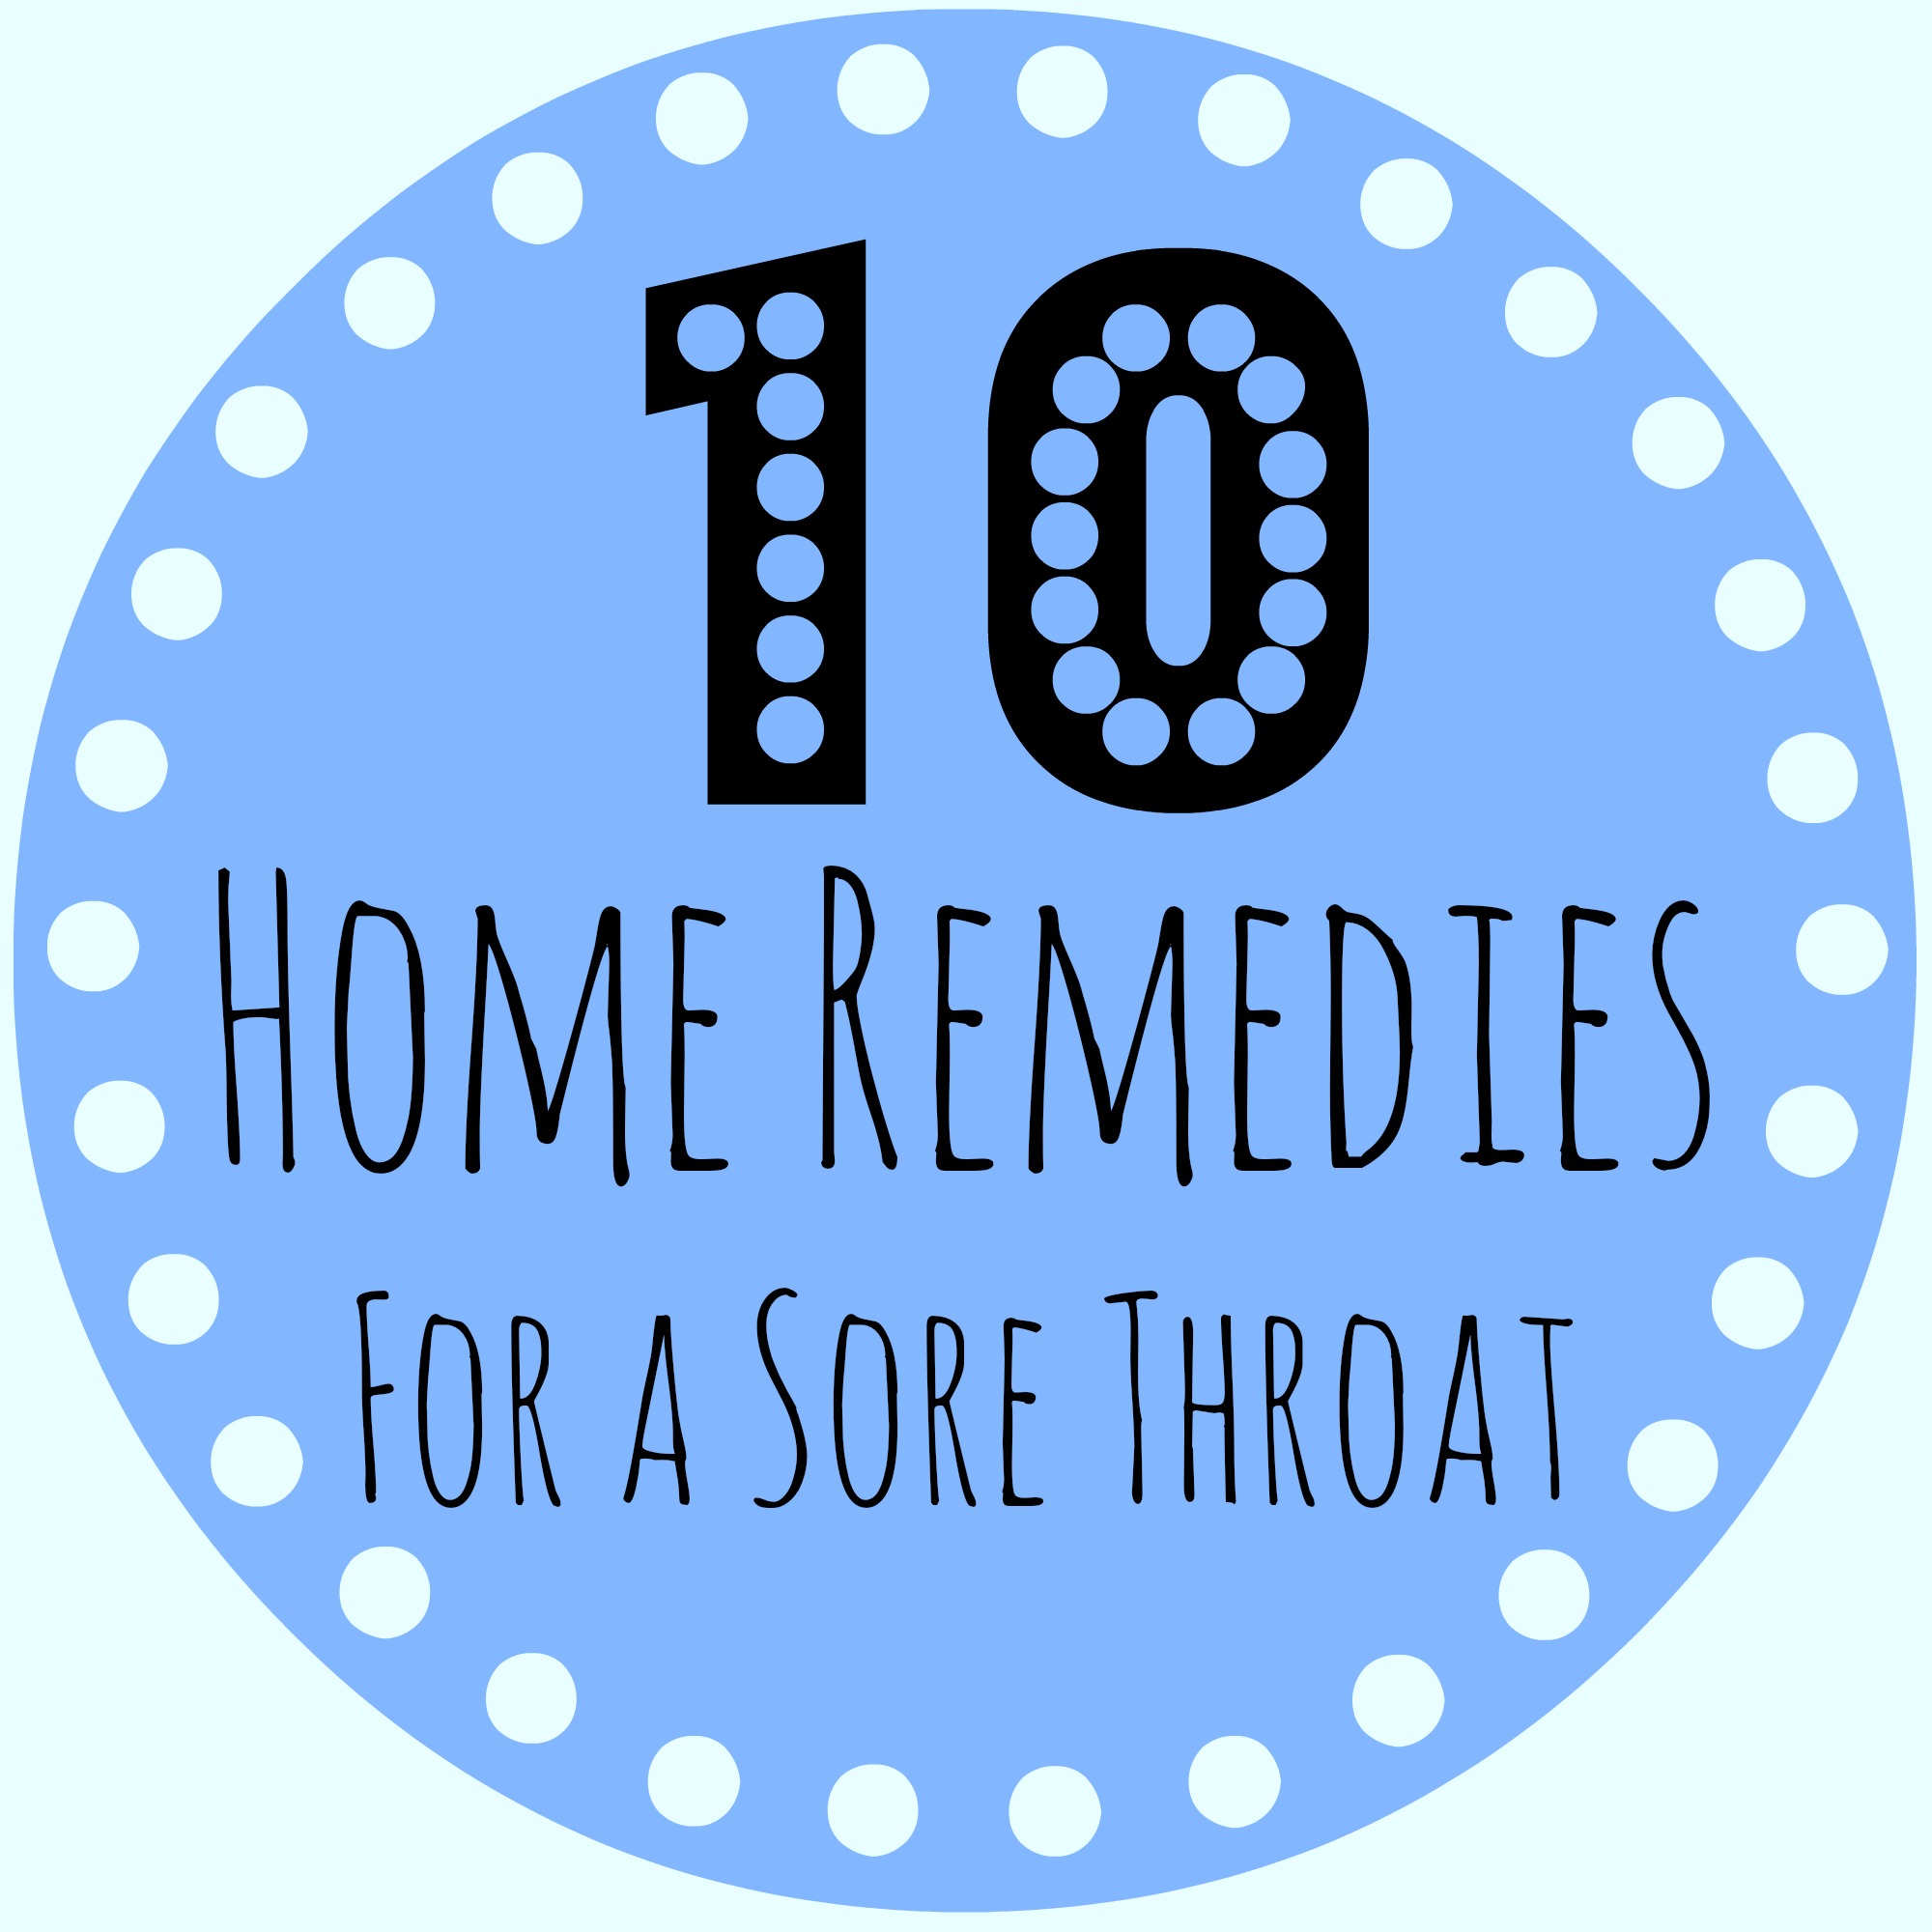 Ten Home Remedies For a Sore Throat